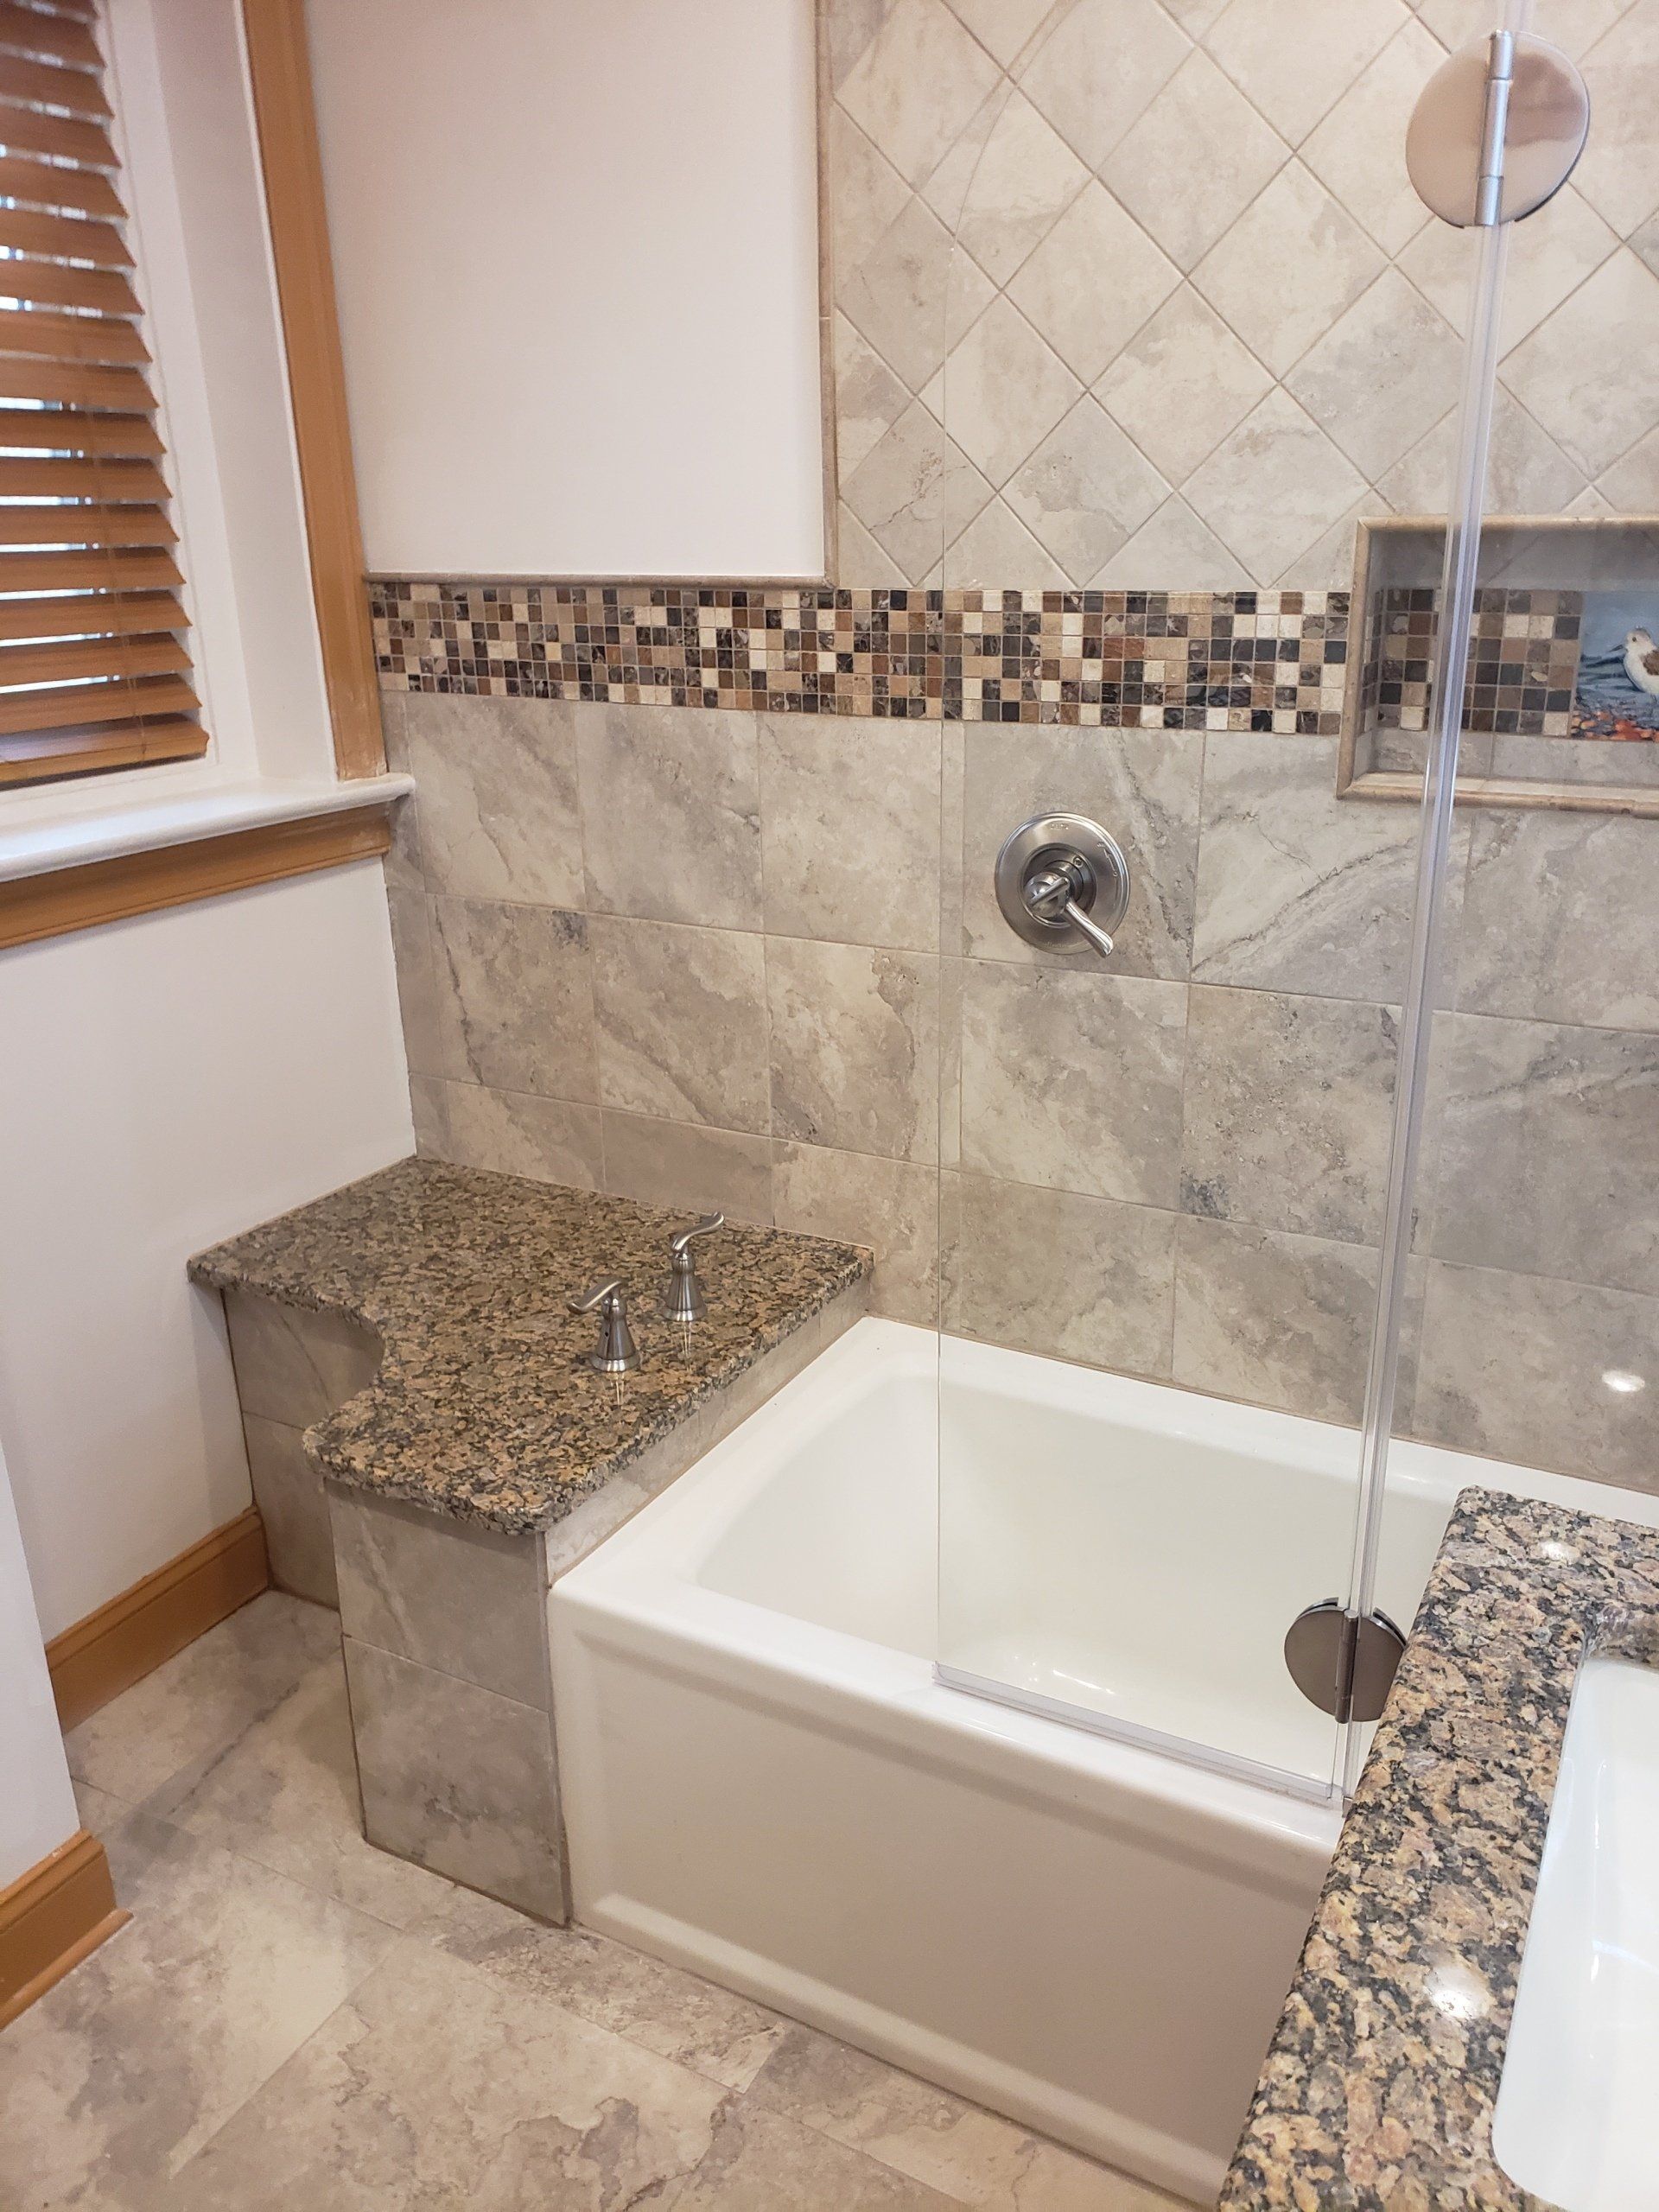 View of custom built bench with custom granite top as repurposed space between the shower tub and wall in this Cheltenham bathroom remodel.